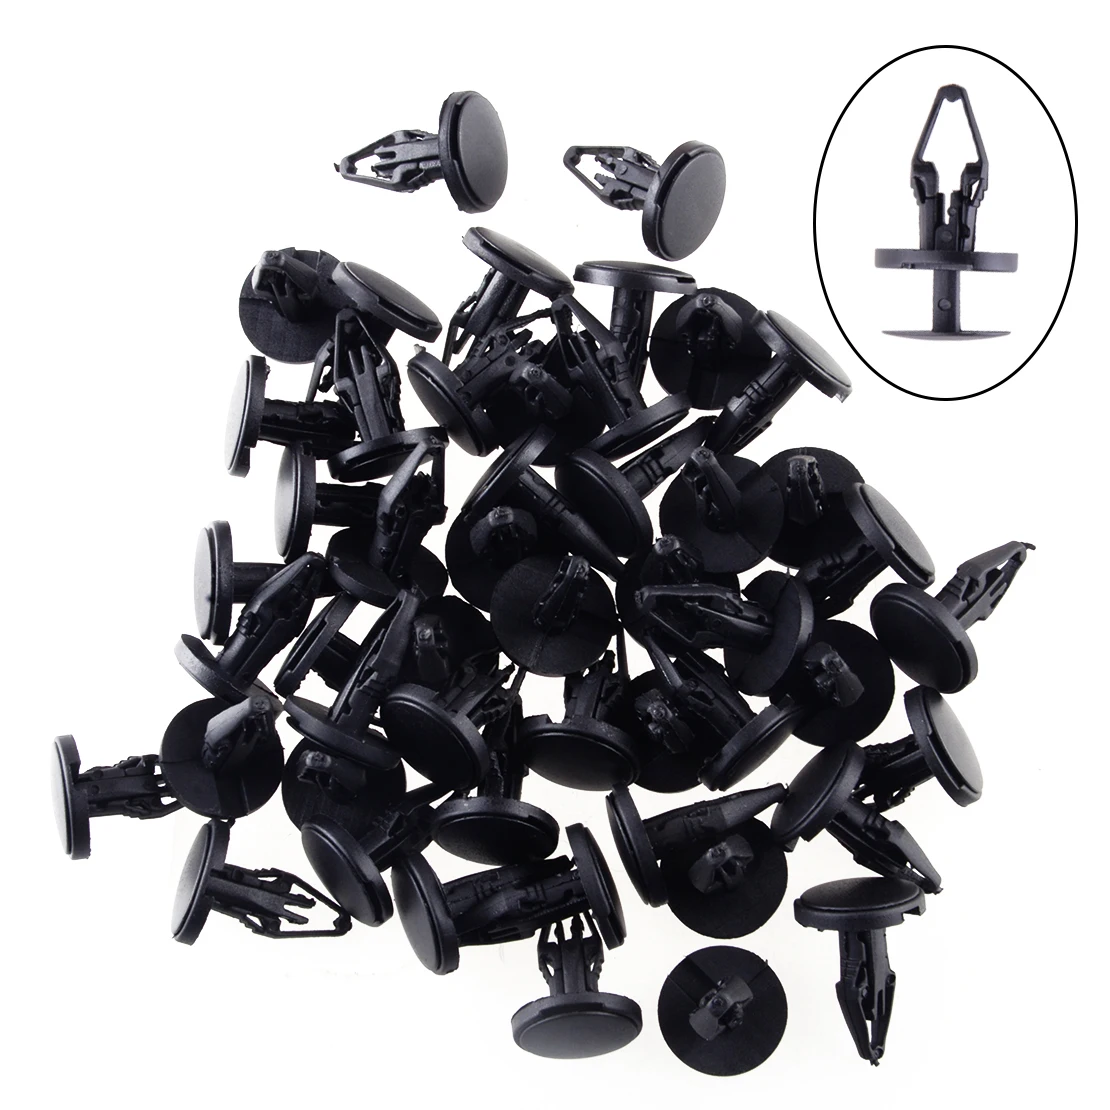 

11589289 50Pcs Bumper Push Type Fender Liner Clip Cowl Vent Retainer Push In Fastener Pin Fit For Ford Chrysler Buick Chevrolet